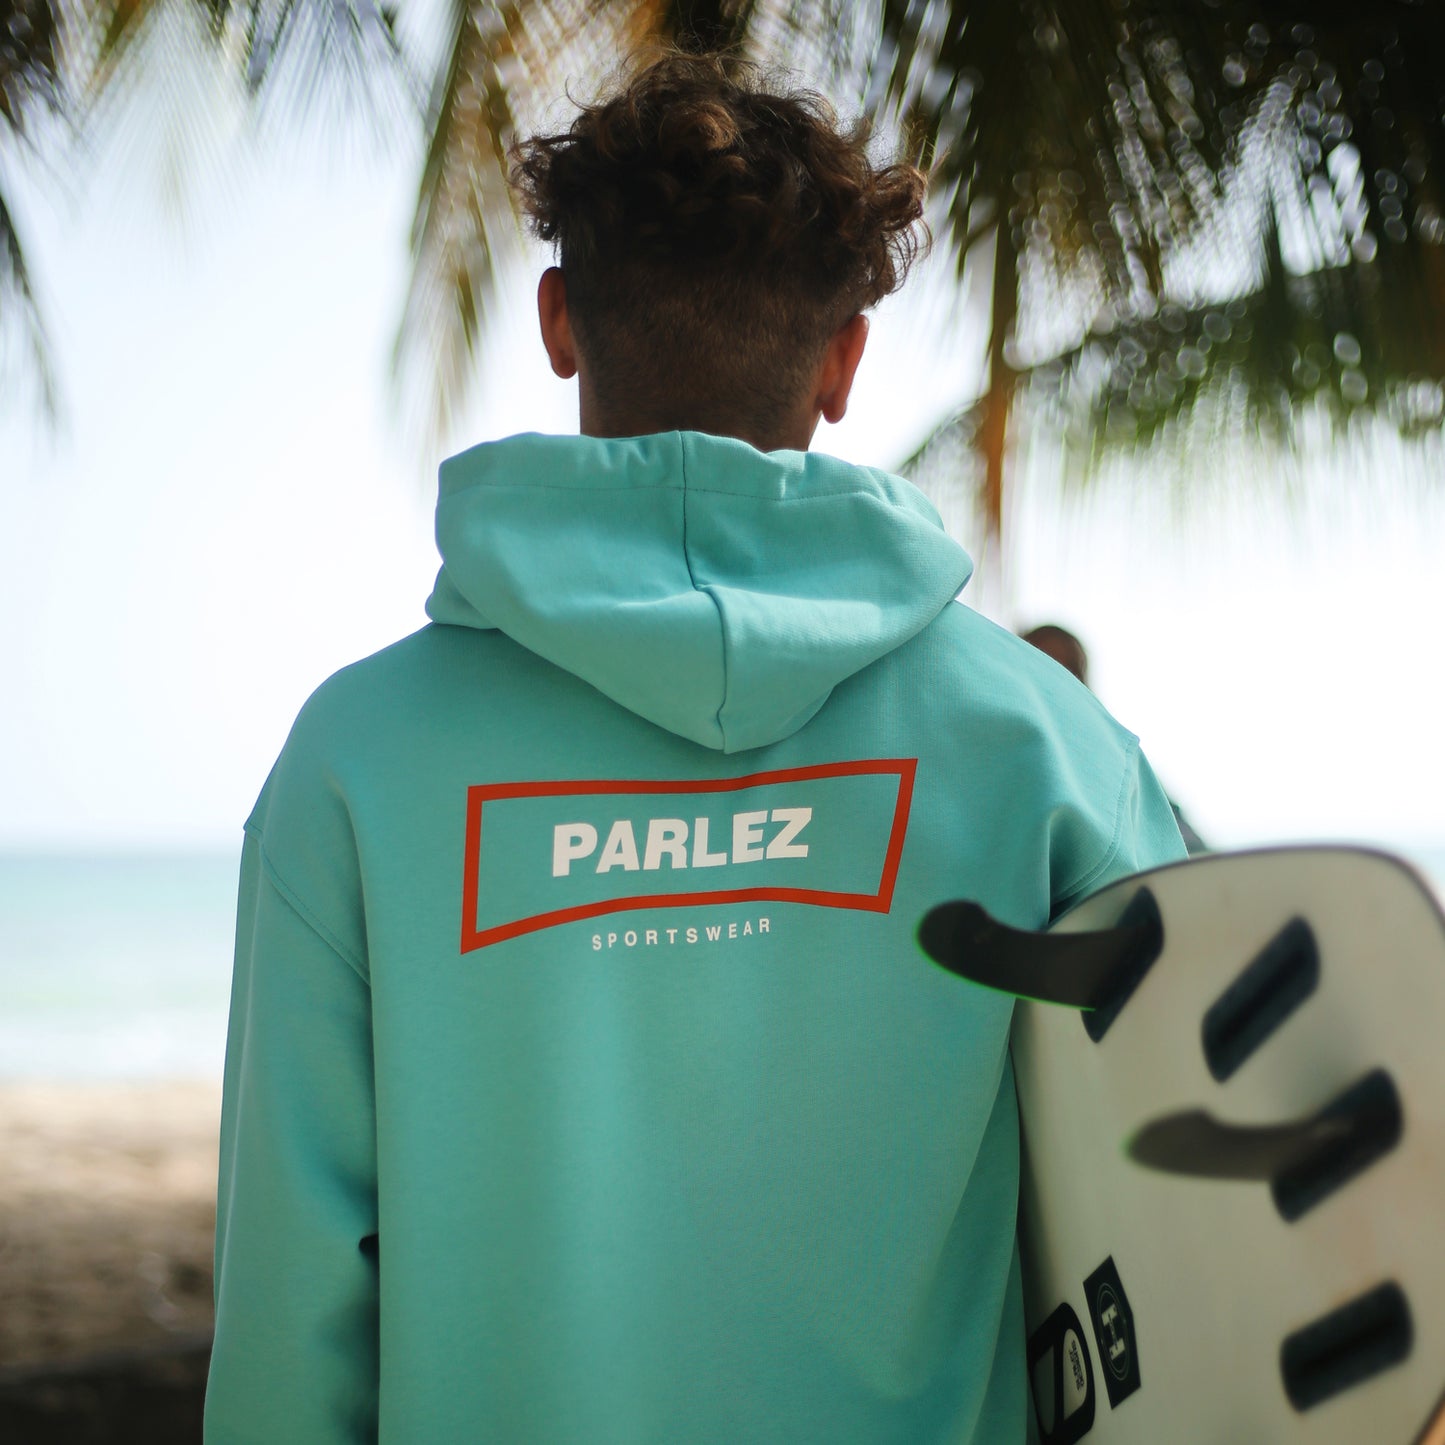 The Mens Downtown Hoodie Dusty Aqua from Parlez clothing